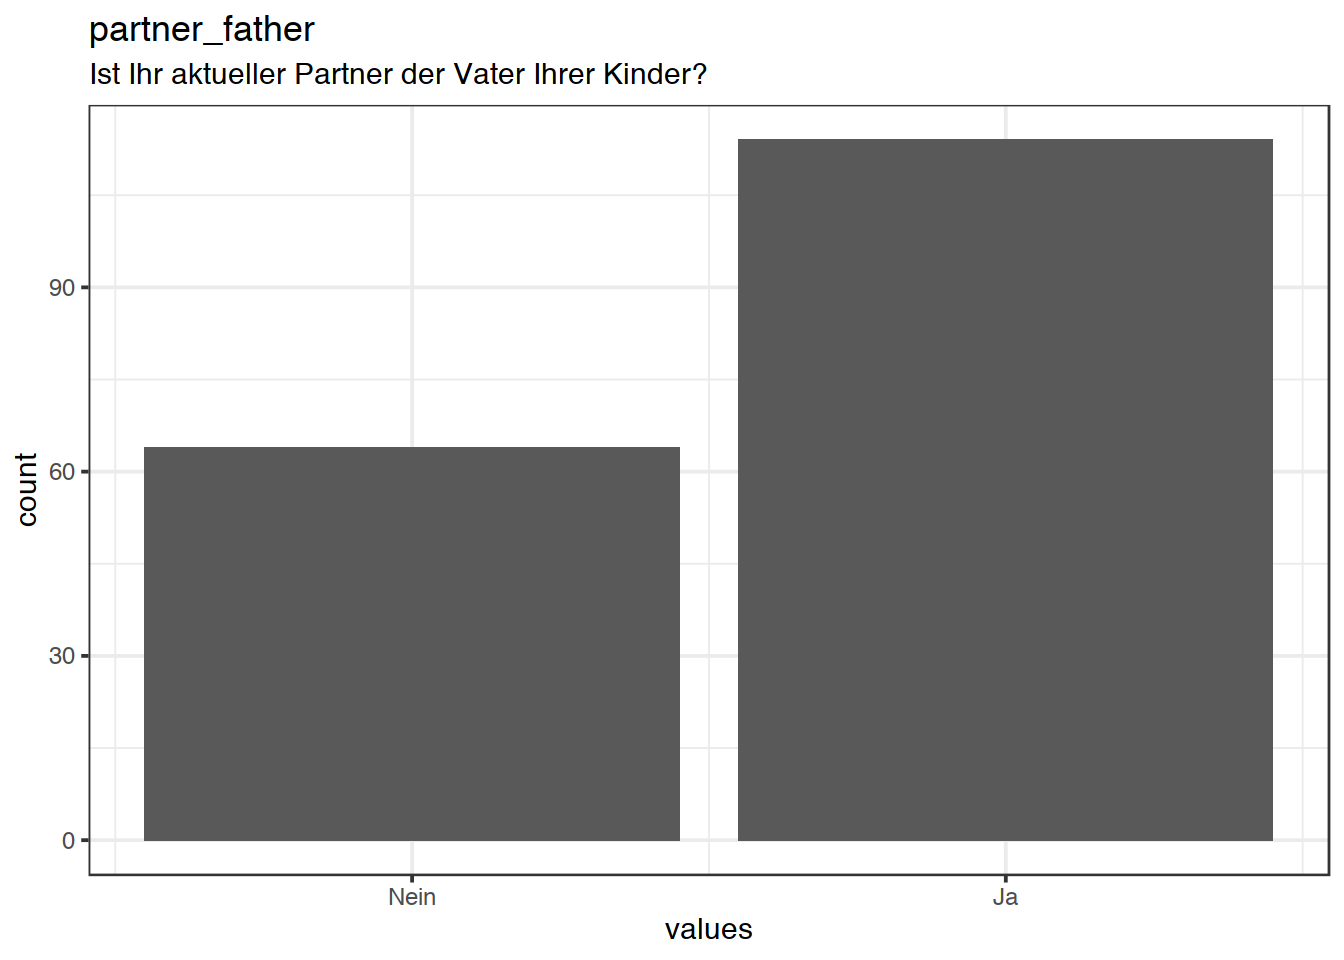 Distribution of values for partner_father